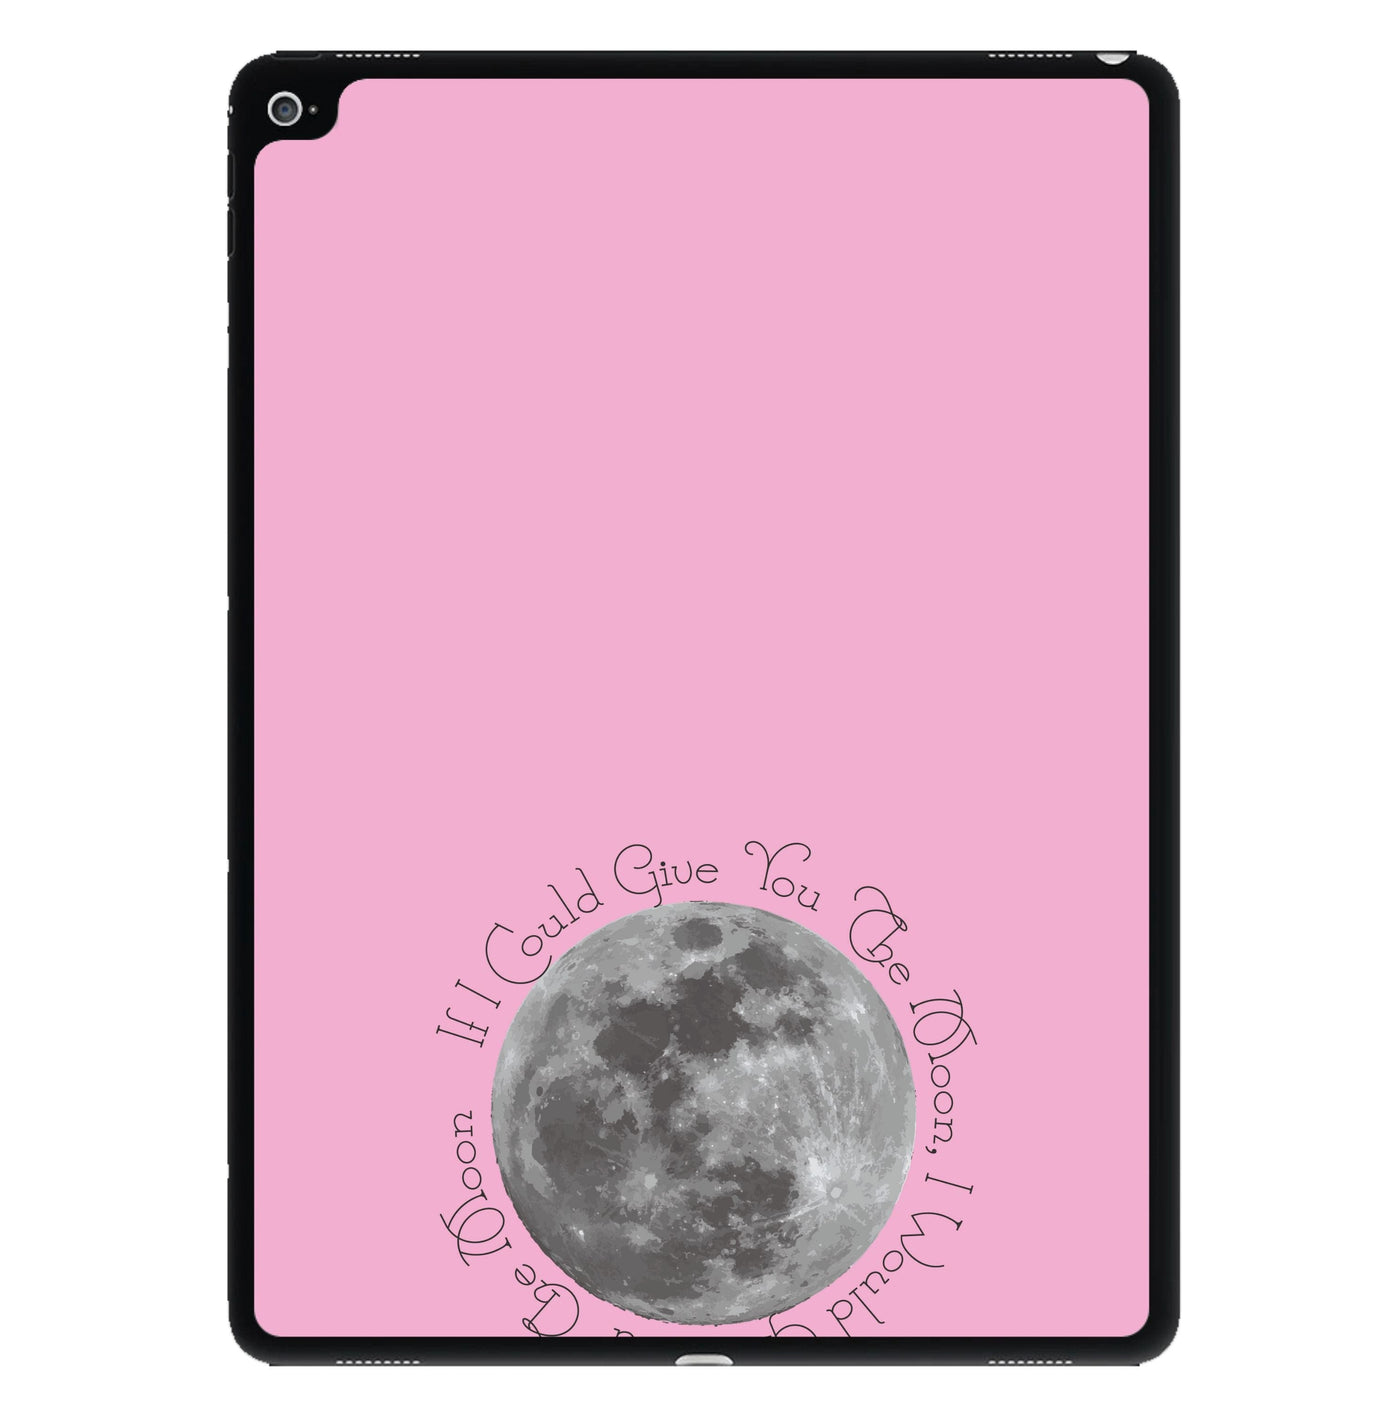 If I Could Give You The Moon - Phoebe Bridgers iPad Case